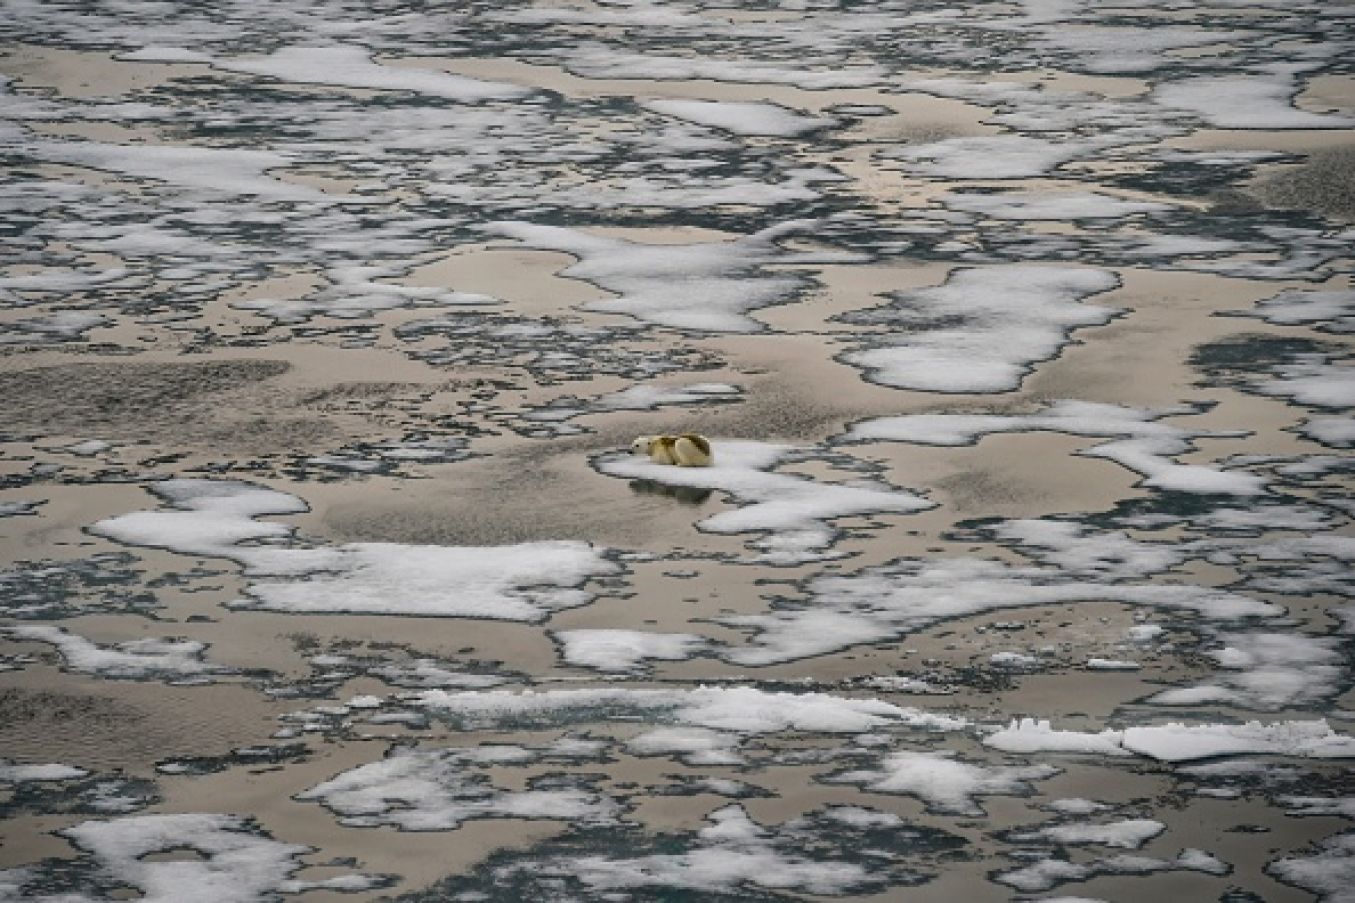 A Polar Bear Is Seen On Ice Floes In The British Channel In The Franz Josef Land Archipelago In August. Photo By Ekaterina Anisomova /Afp Via Getty Images